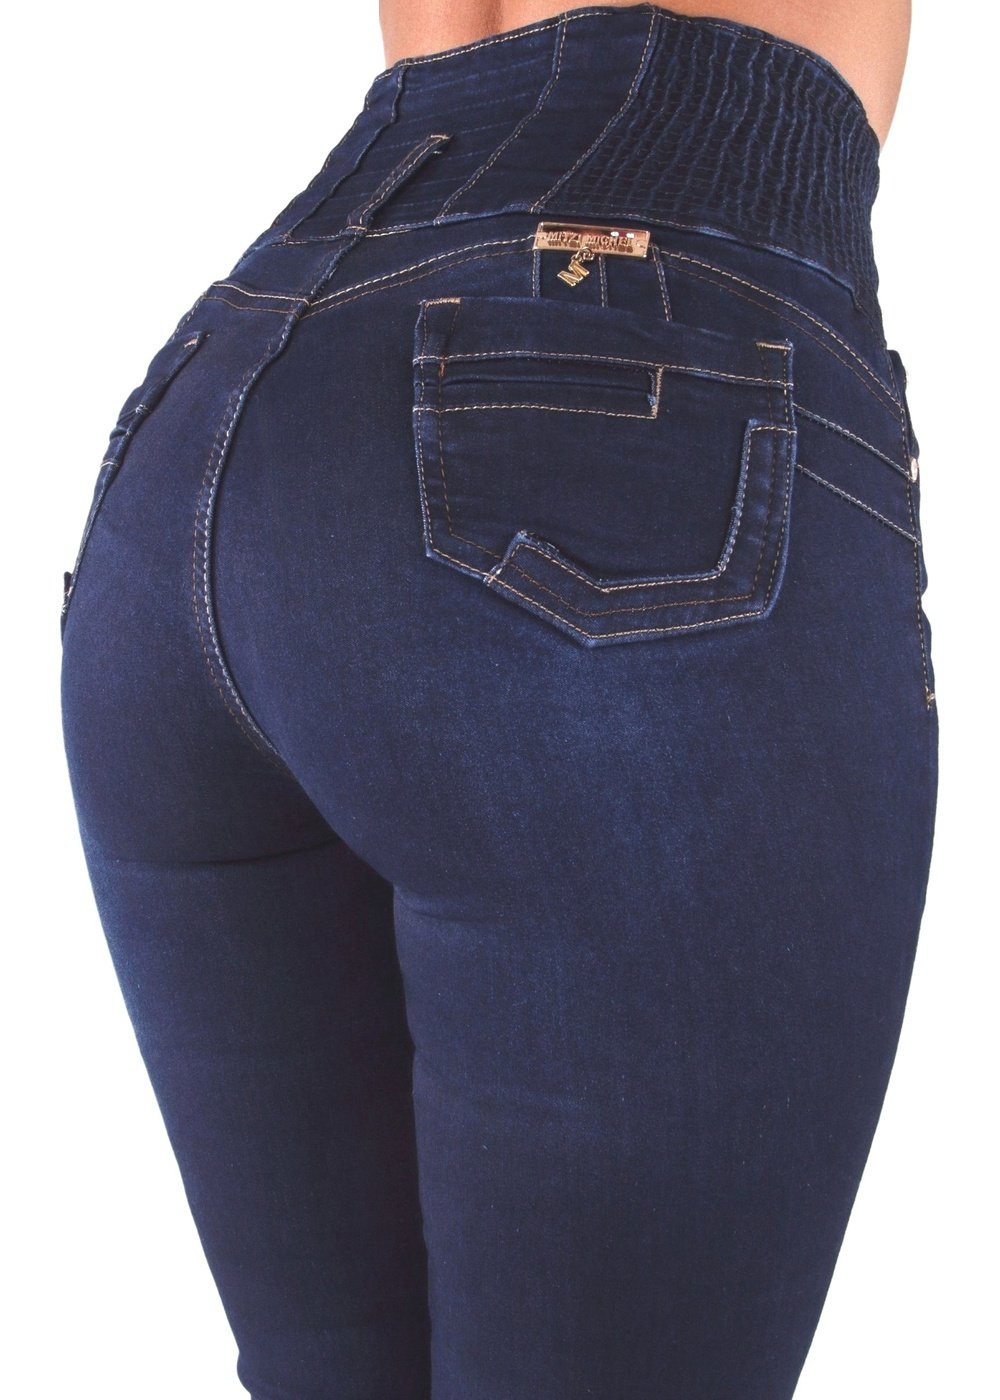 Jeans Blue Dark Stretch High Rise Levanta Cola Lifter Colombian Push Up  Skinny